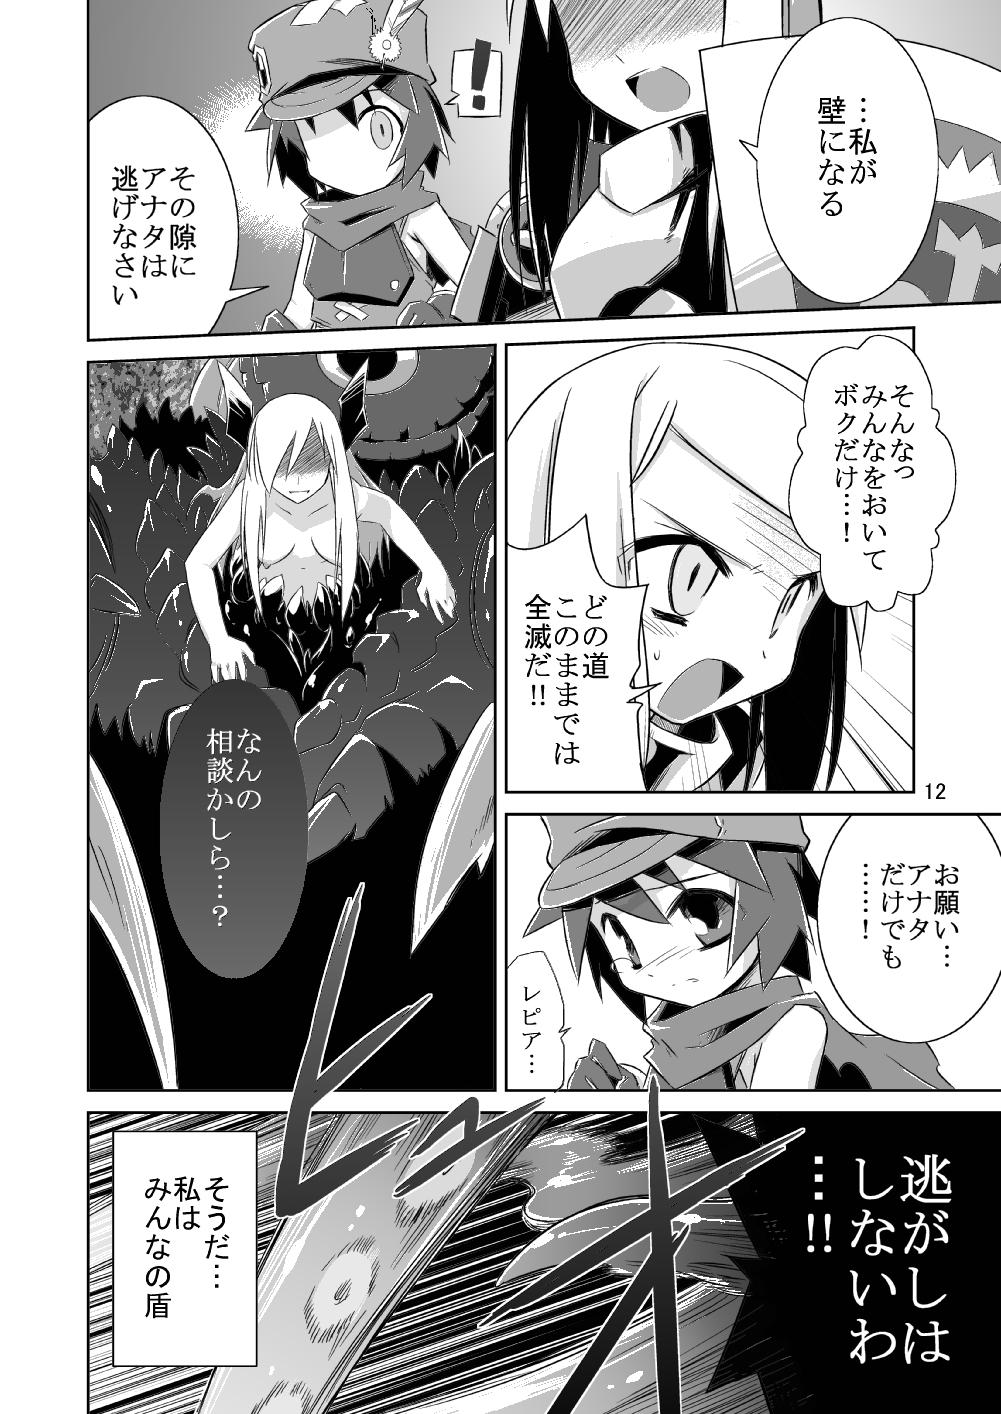 Movie Permanent embrace - Etrian odyssey Peeing - Page 11